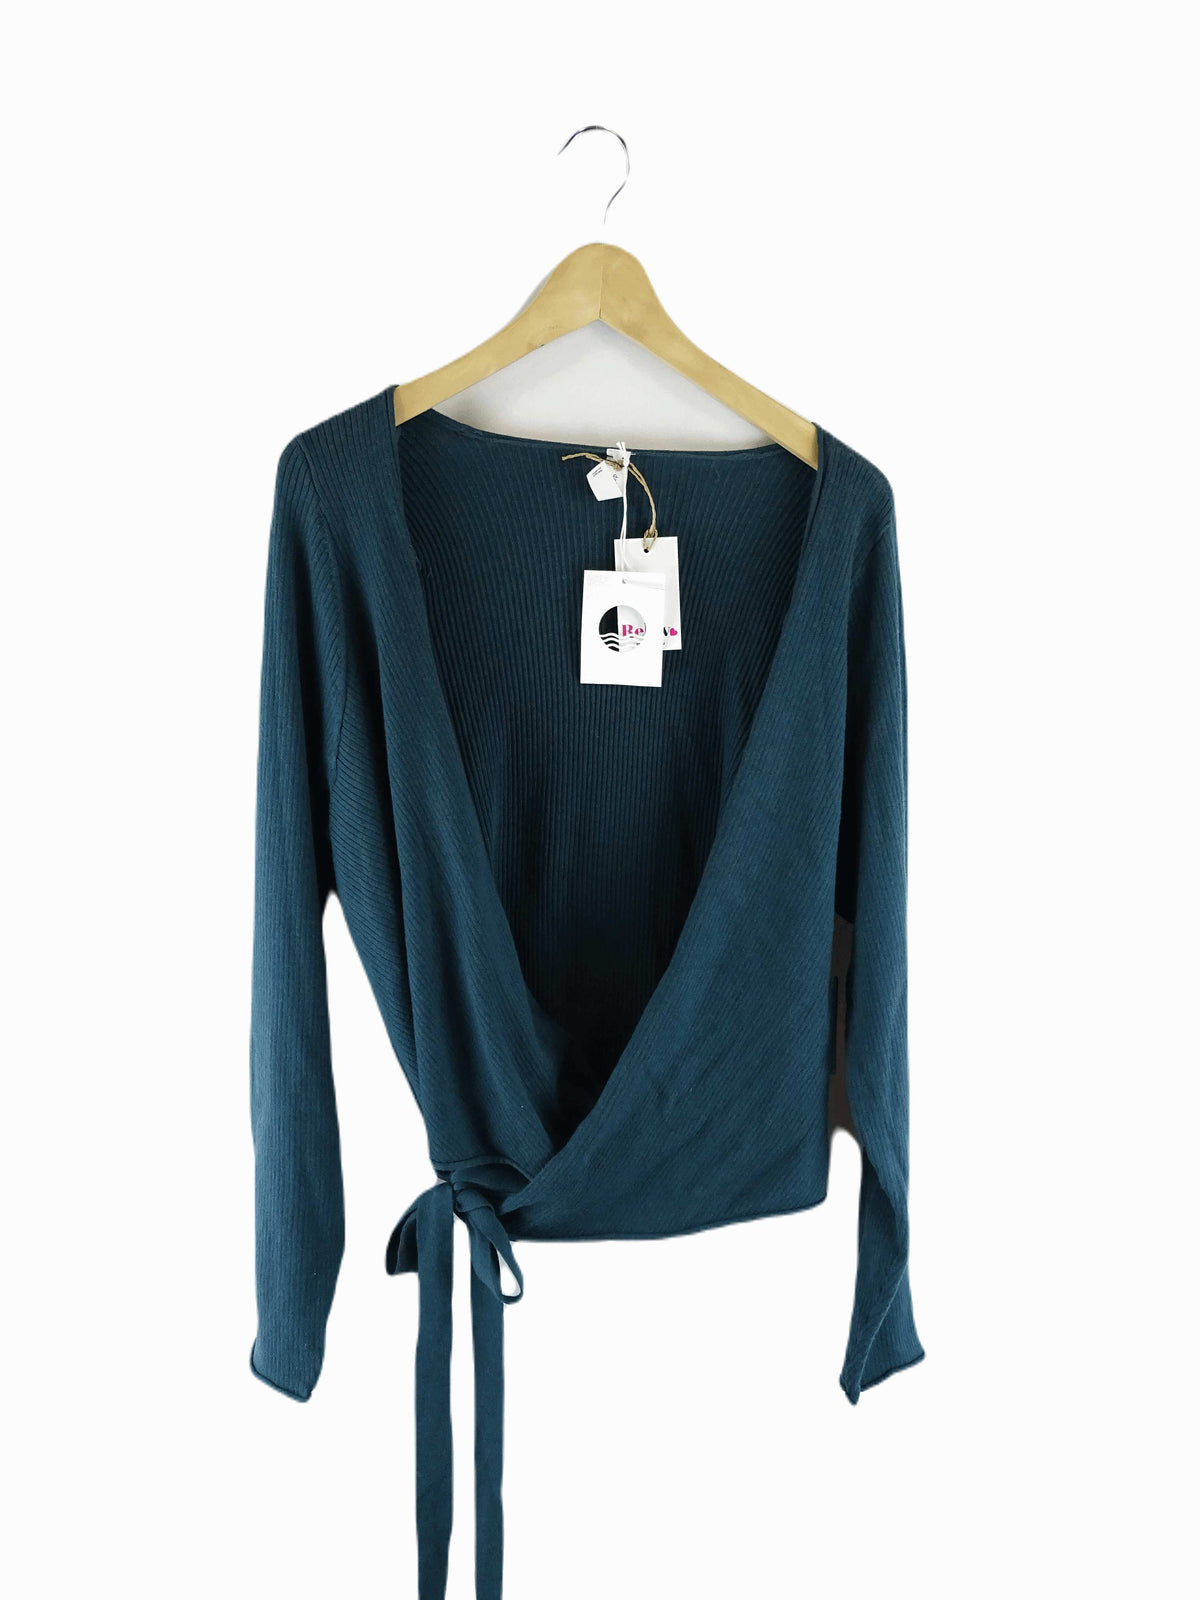 Daily Practice By Anthropology Green Wrap Top 3XL